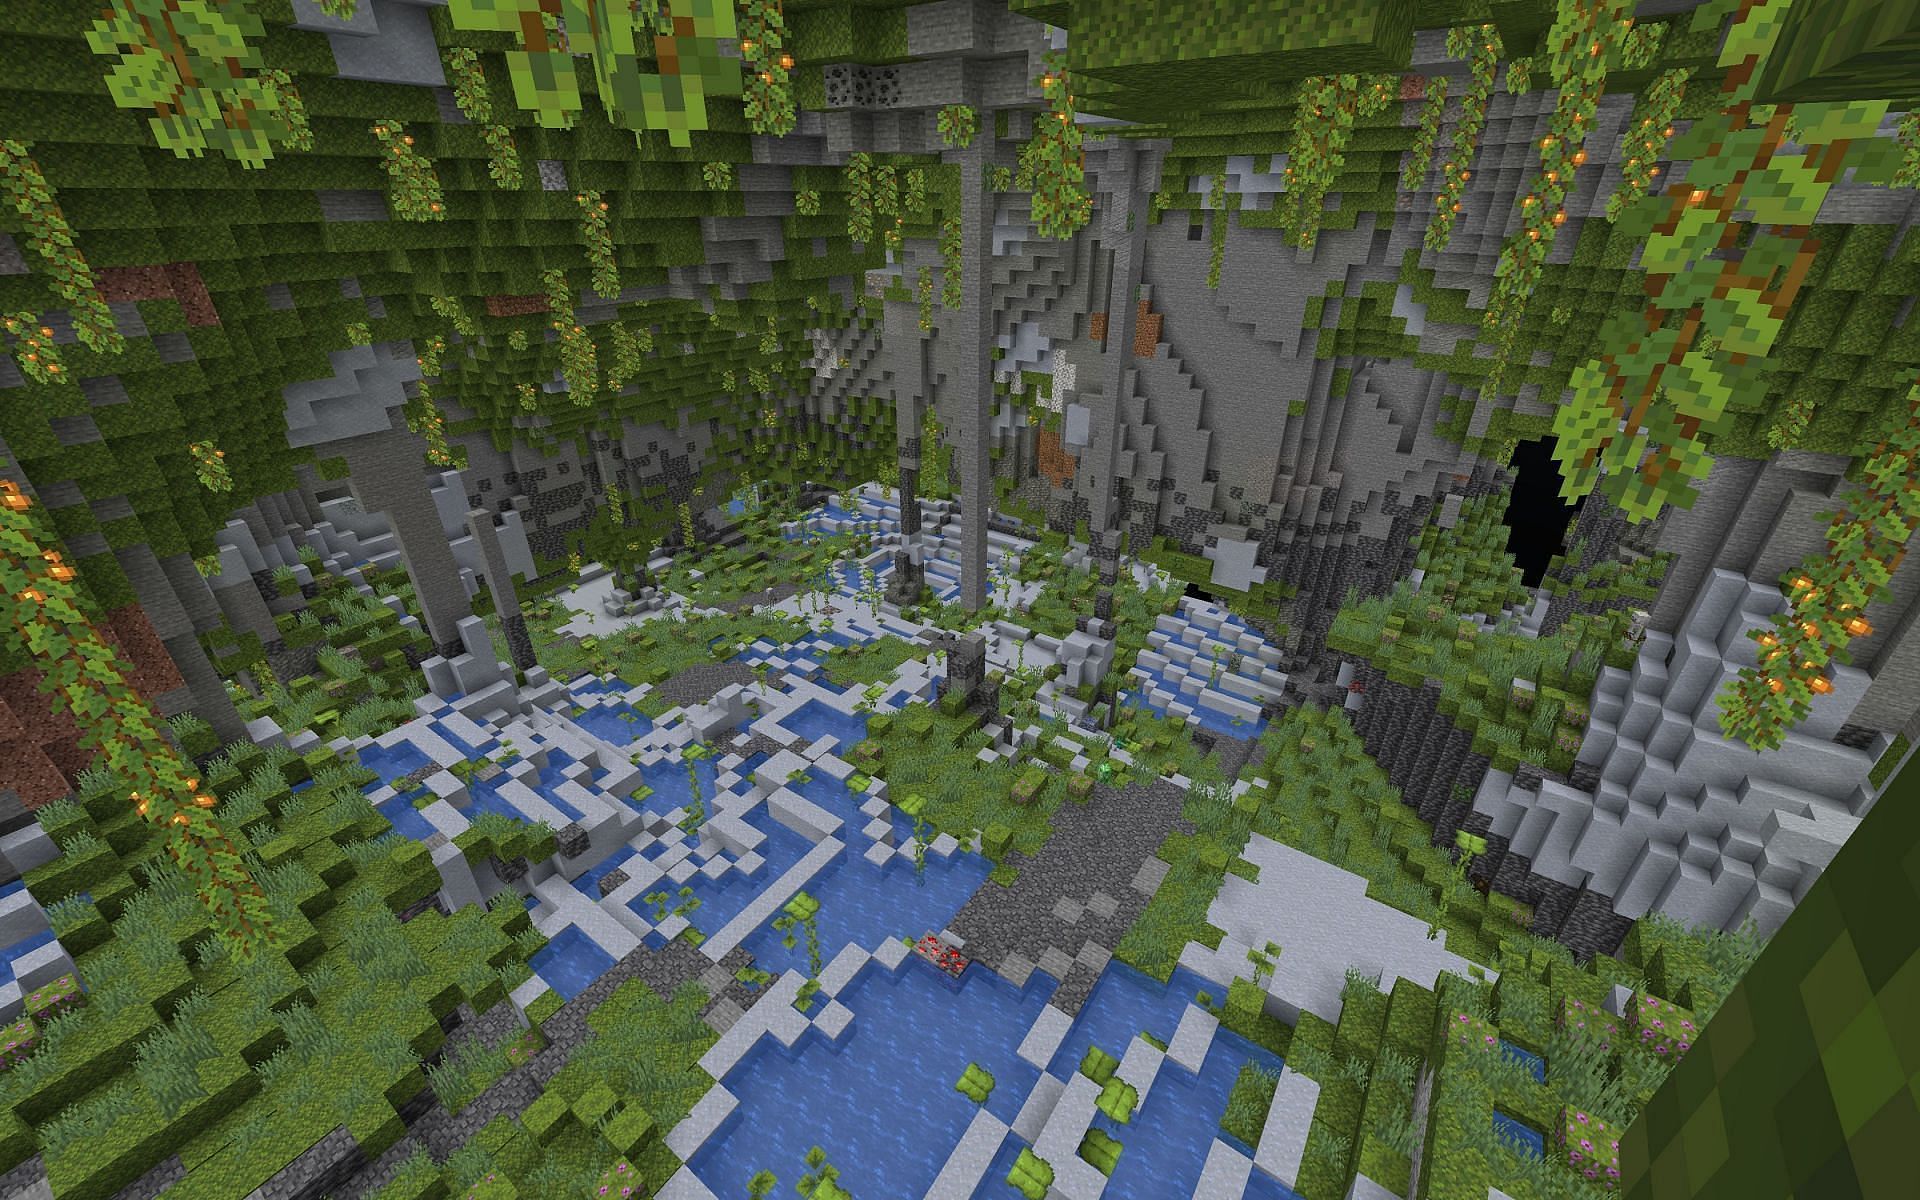 Lush caves are one of many biomes implemented in Minecraft this year (Image via Mojang)